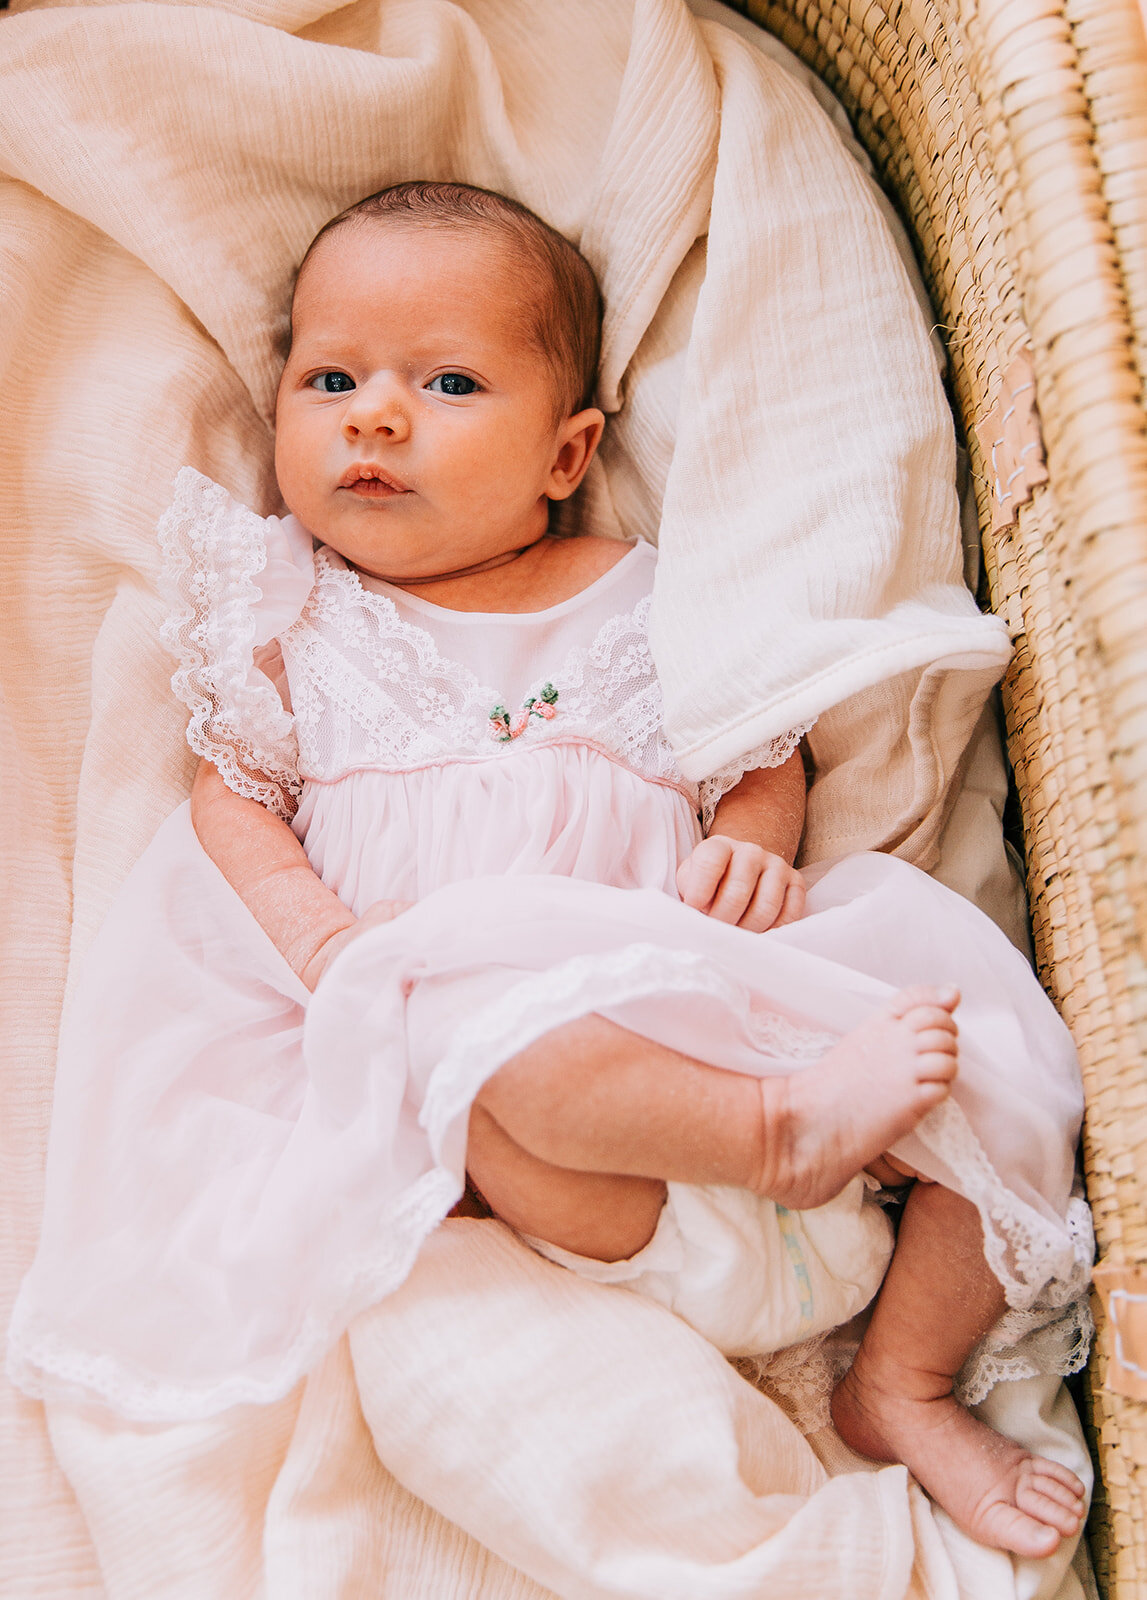  precious memories family pink dress baby fashion family traditions baby girl in lacy dress baby toes sweet sentiments fresh from heaven little angel bella alder photography professional family photographers in logan utah cache valley professional ph